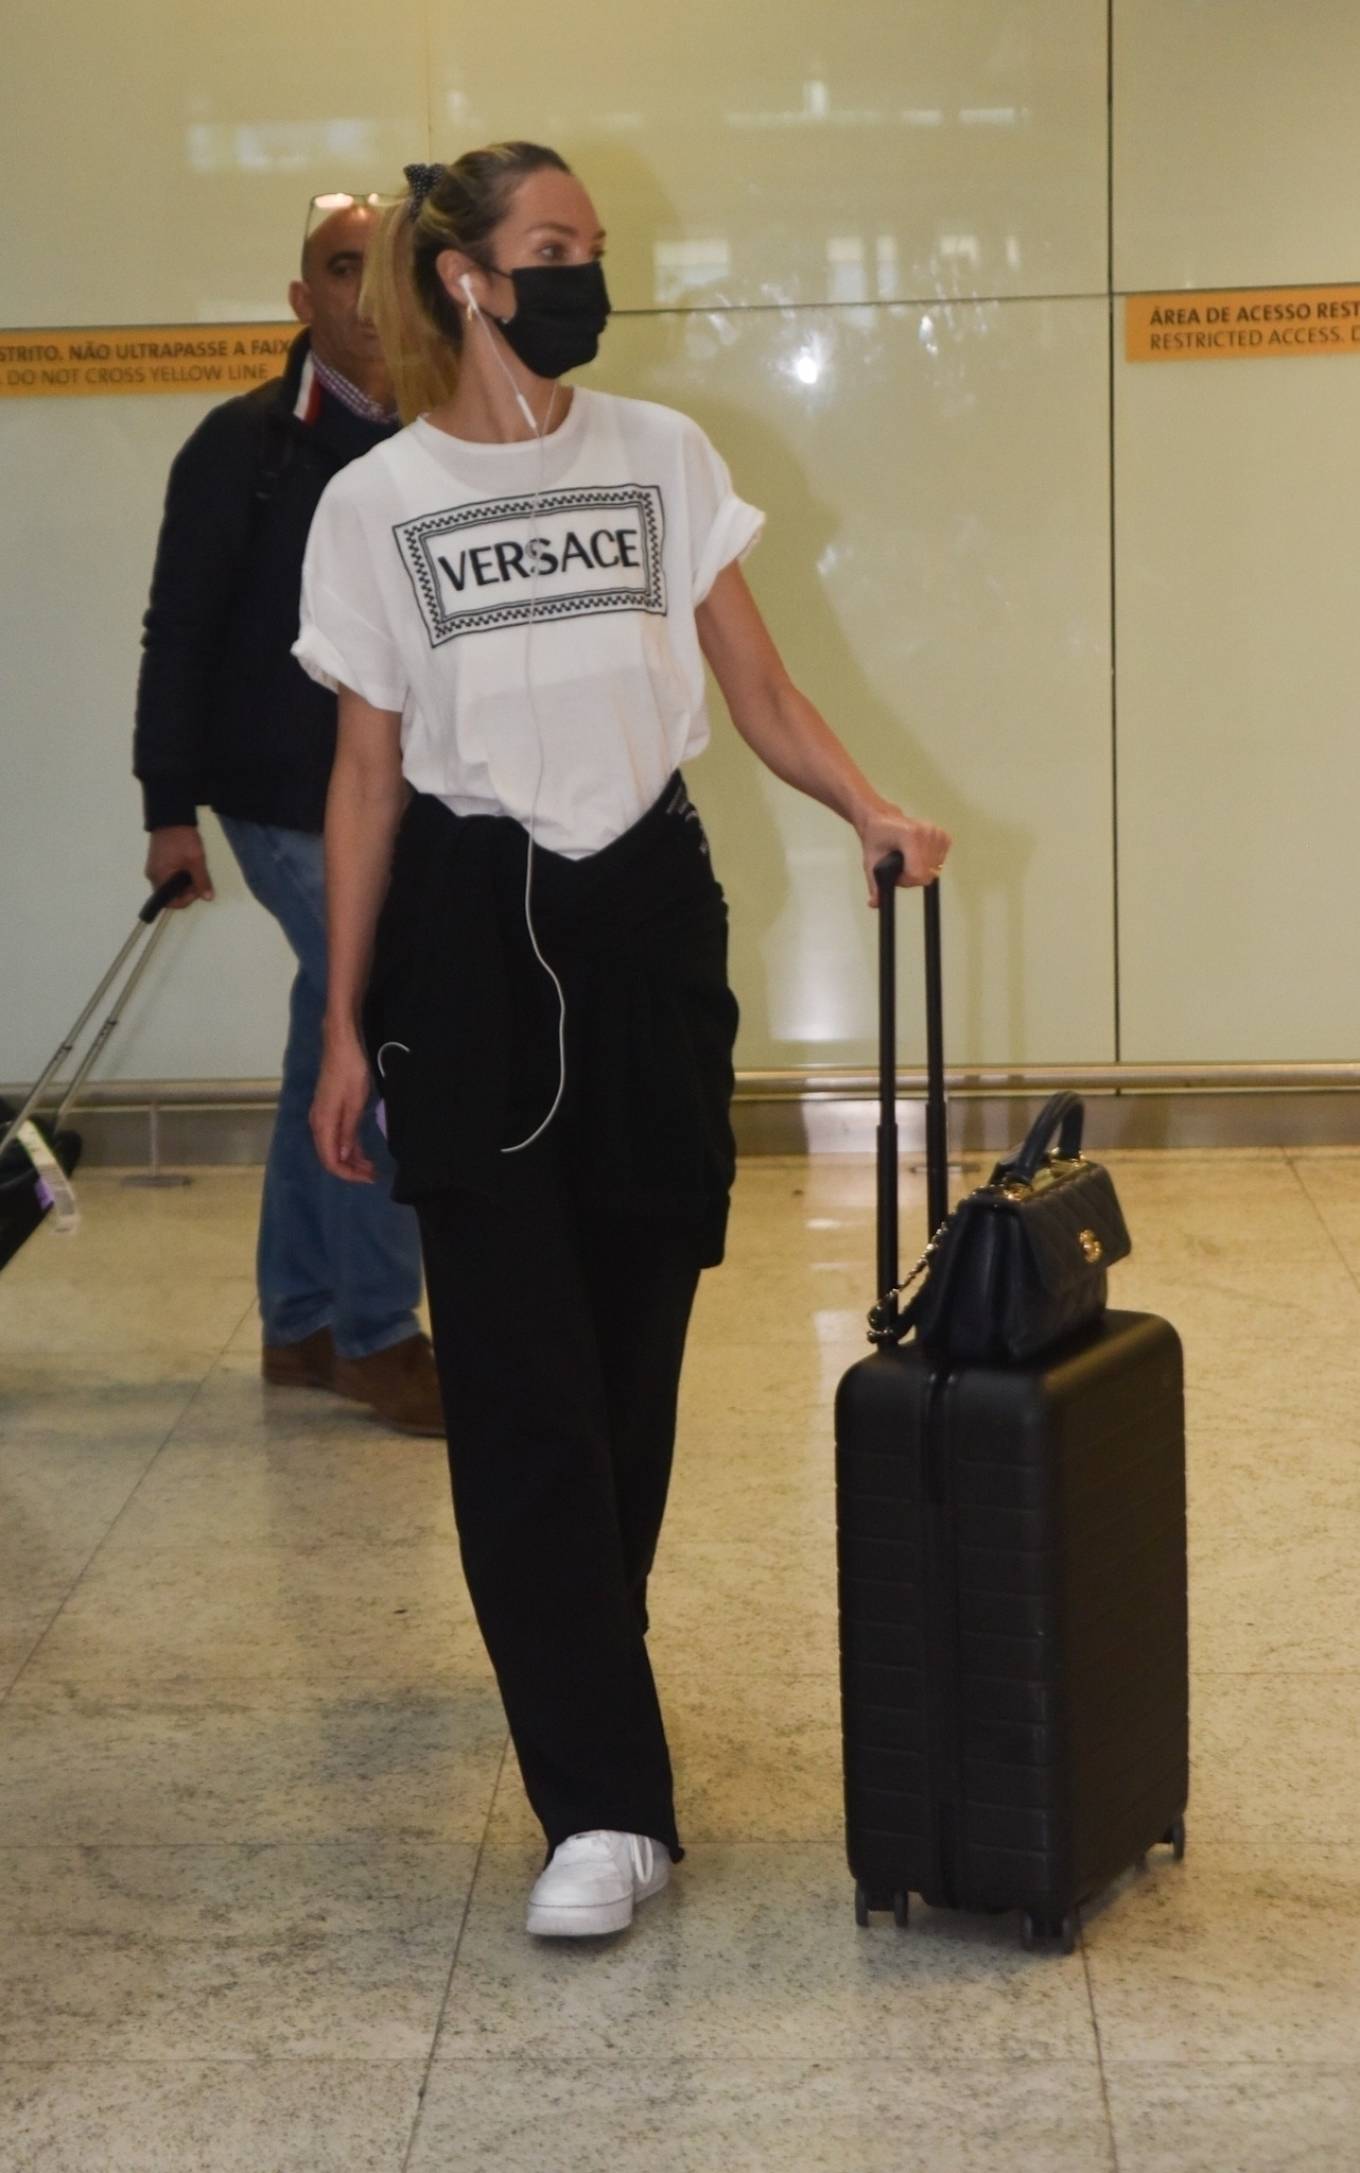 Candice Swanepoel 2023 : Candice Swanepoel – Seen in Versace as she touches down at Guarulhos airport in São Paulo-03